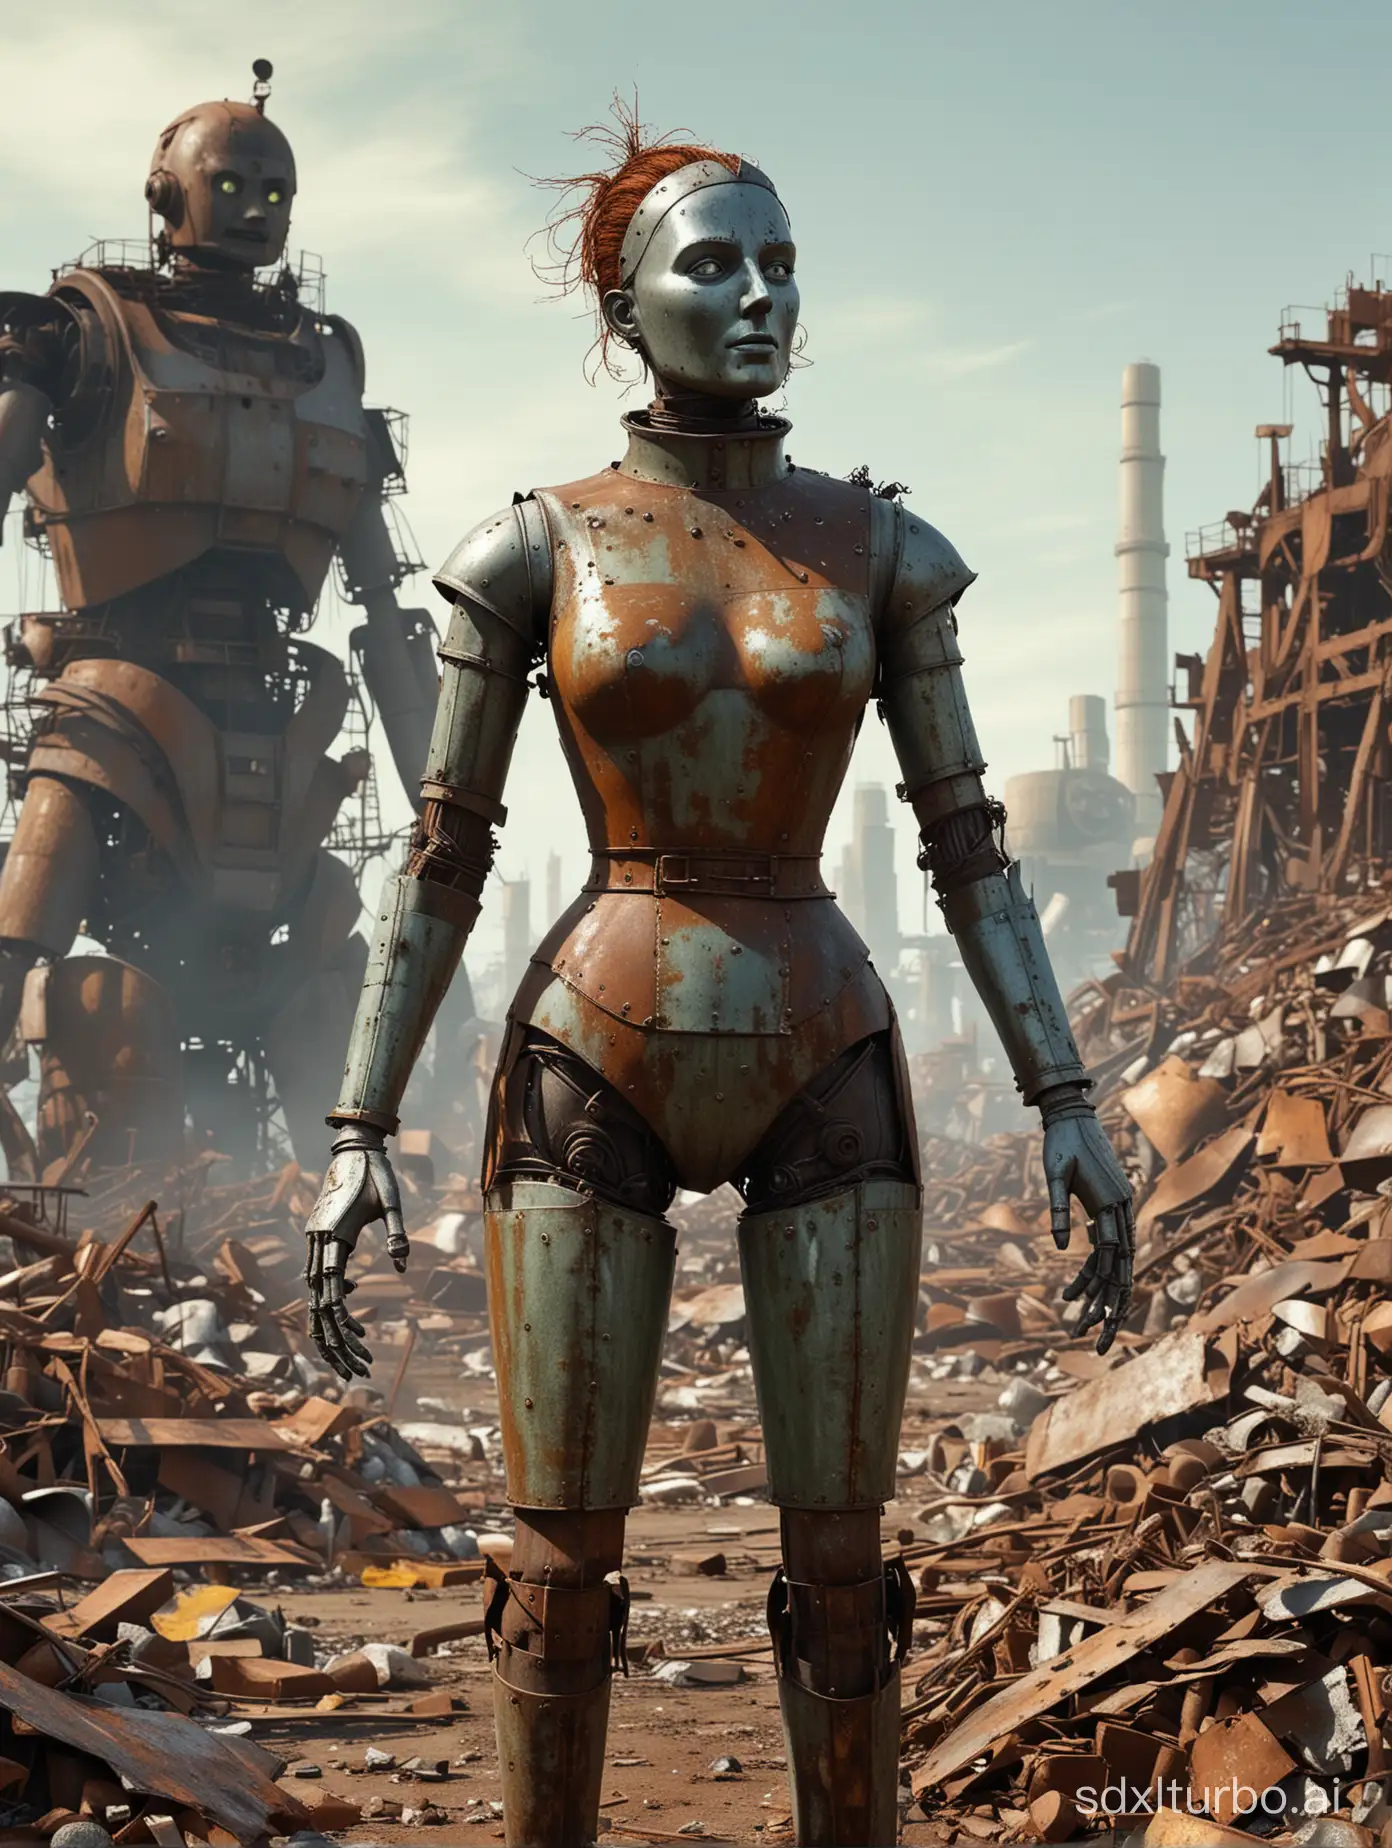 Rusty-Tin-Woman-Amidst-Scrap-Metal-in-Polluted-Environment